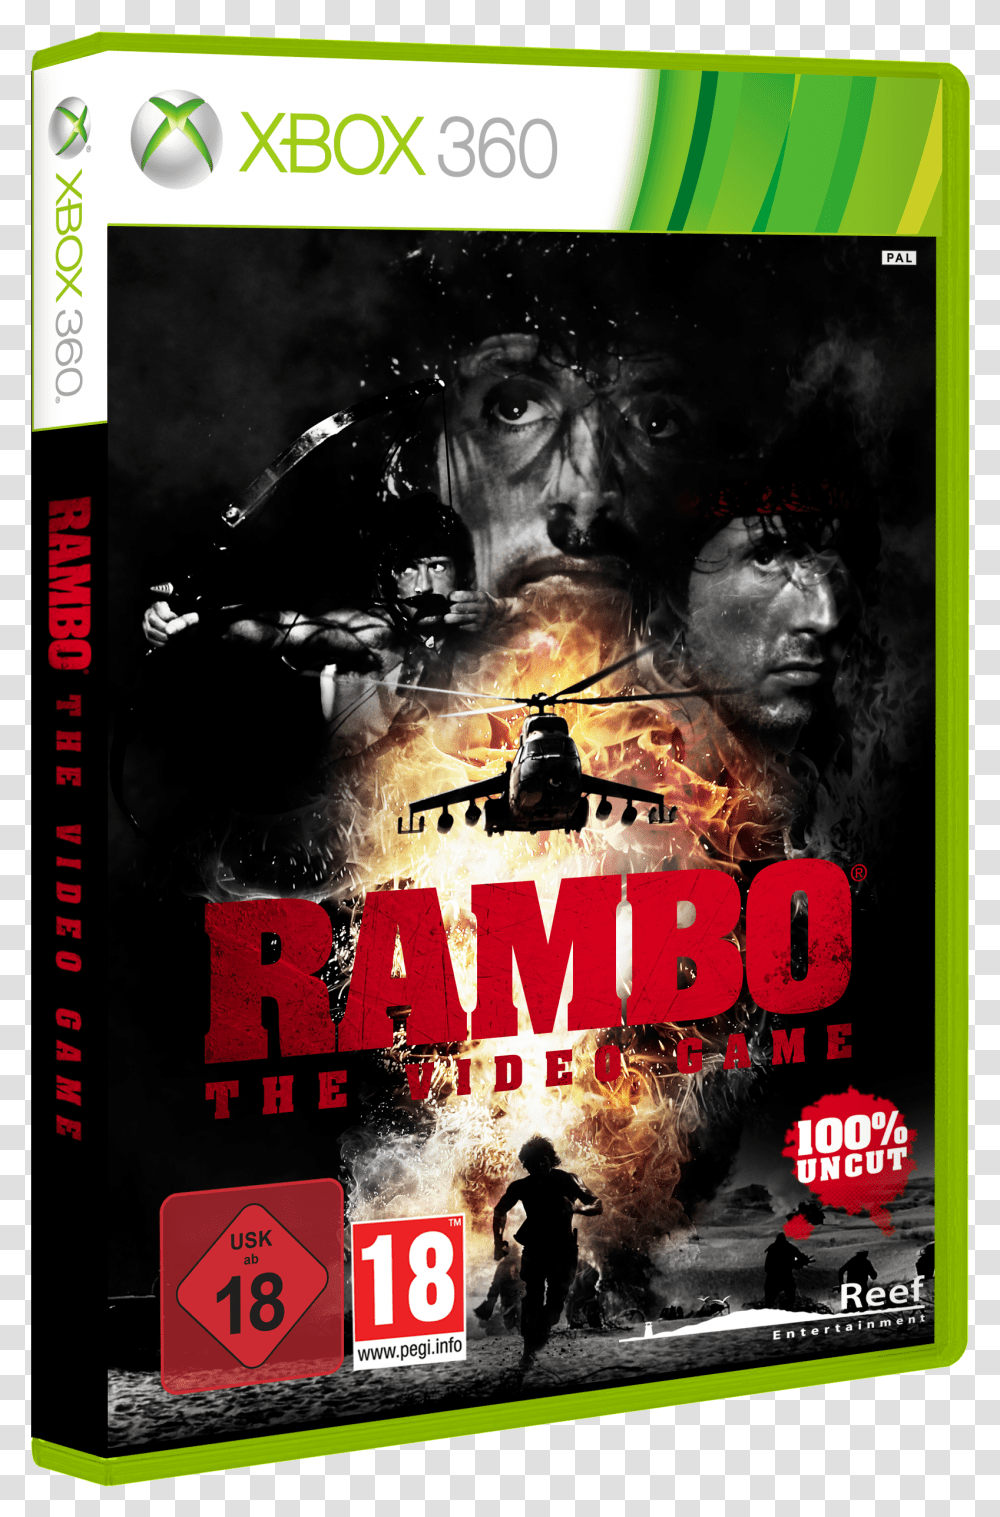 Rambo The Video Game Pc Cover, Poster, Advertisement, Person, Flyer Transparent Png